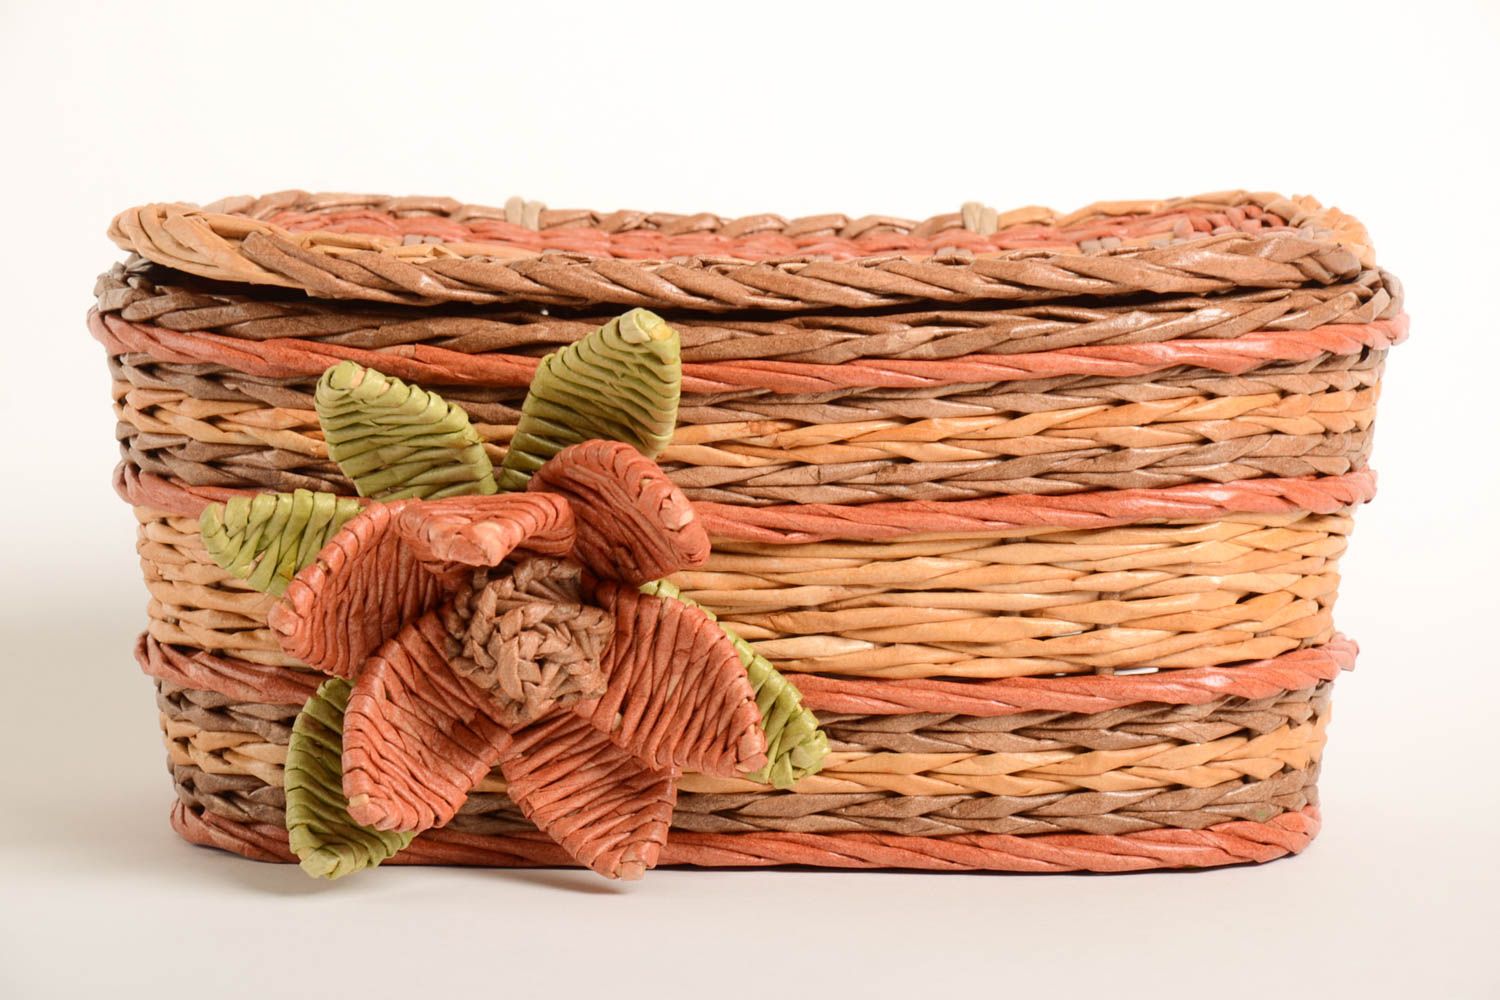 Stylish handmade woven bread basket cute unusual home accessories lovely decor photo 2